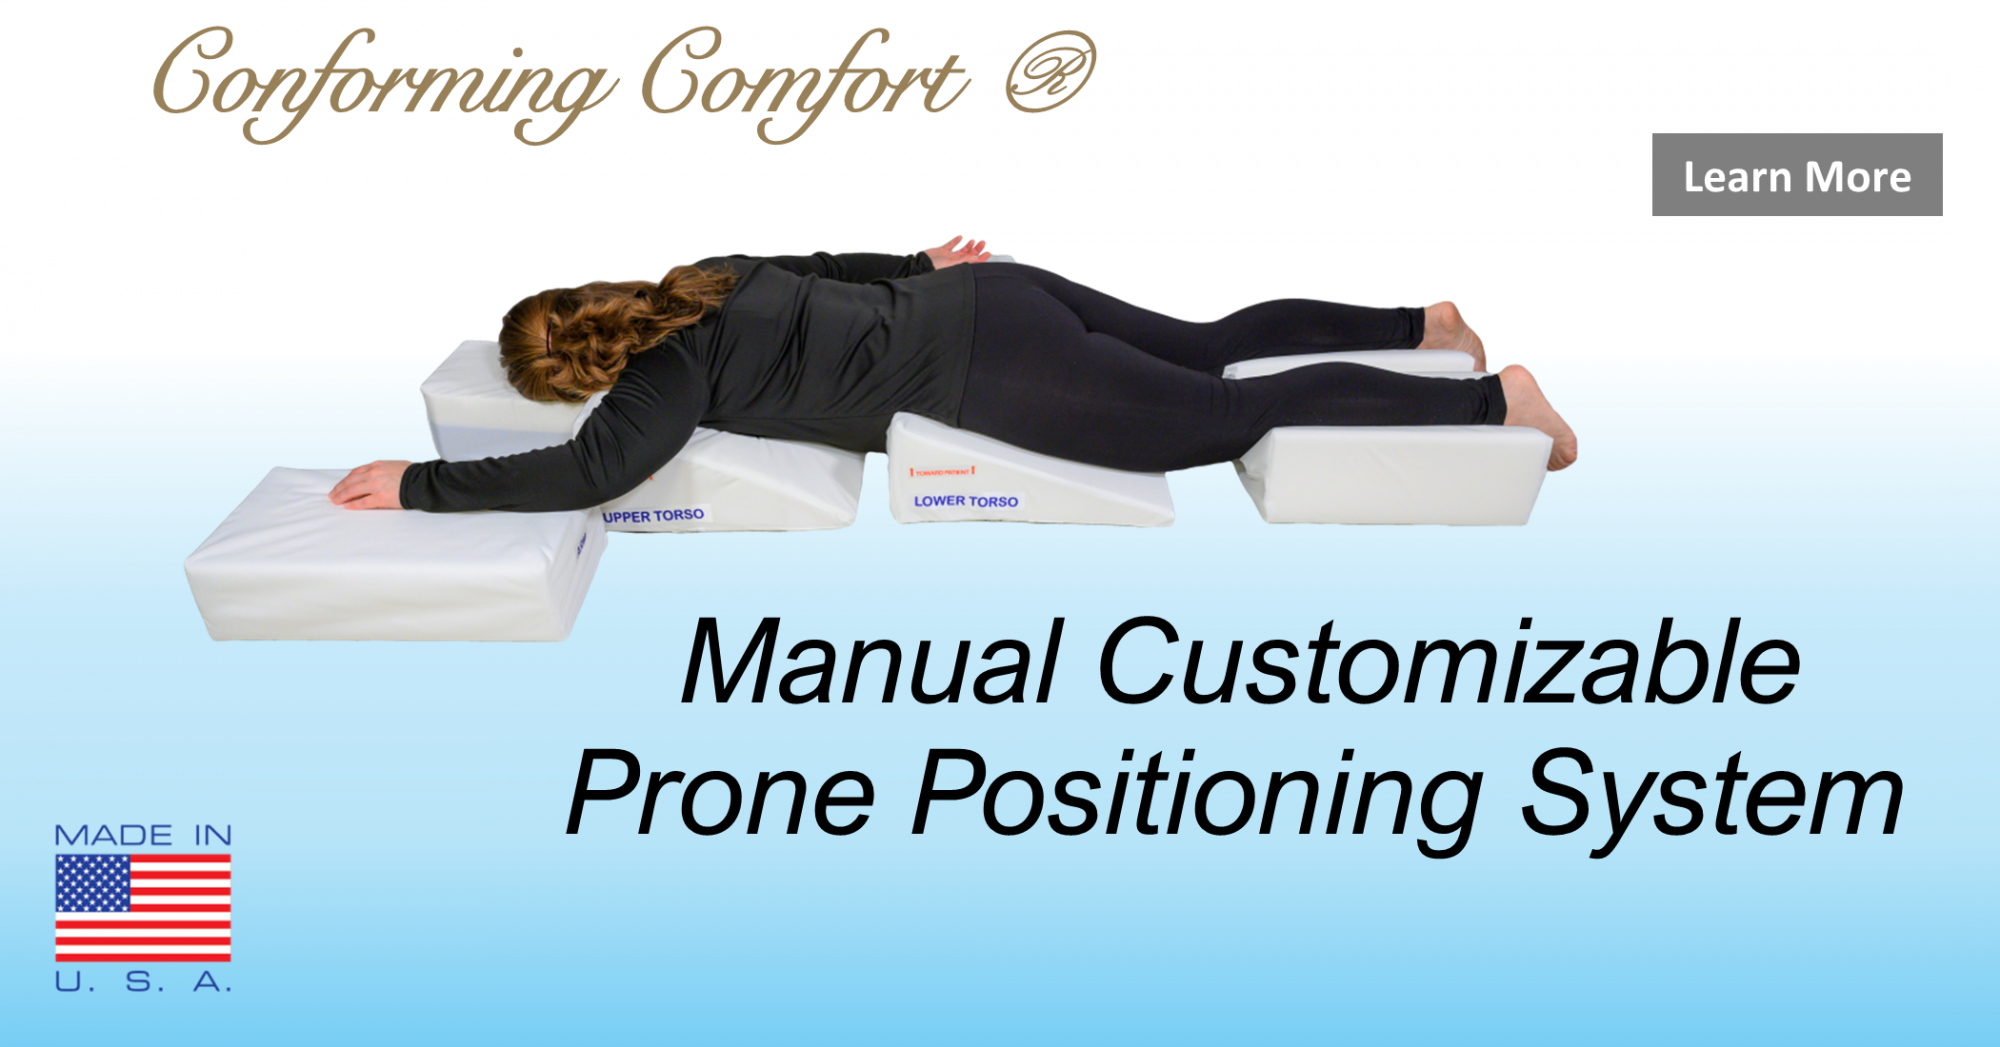 Manual Customizable Prone Positioning System